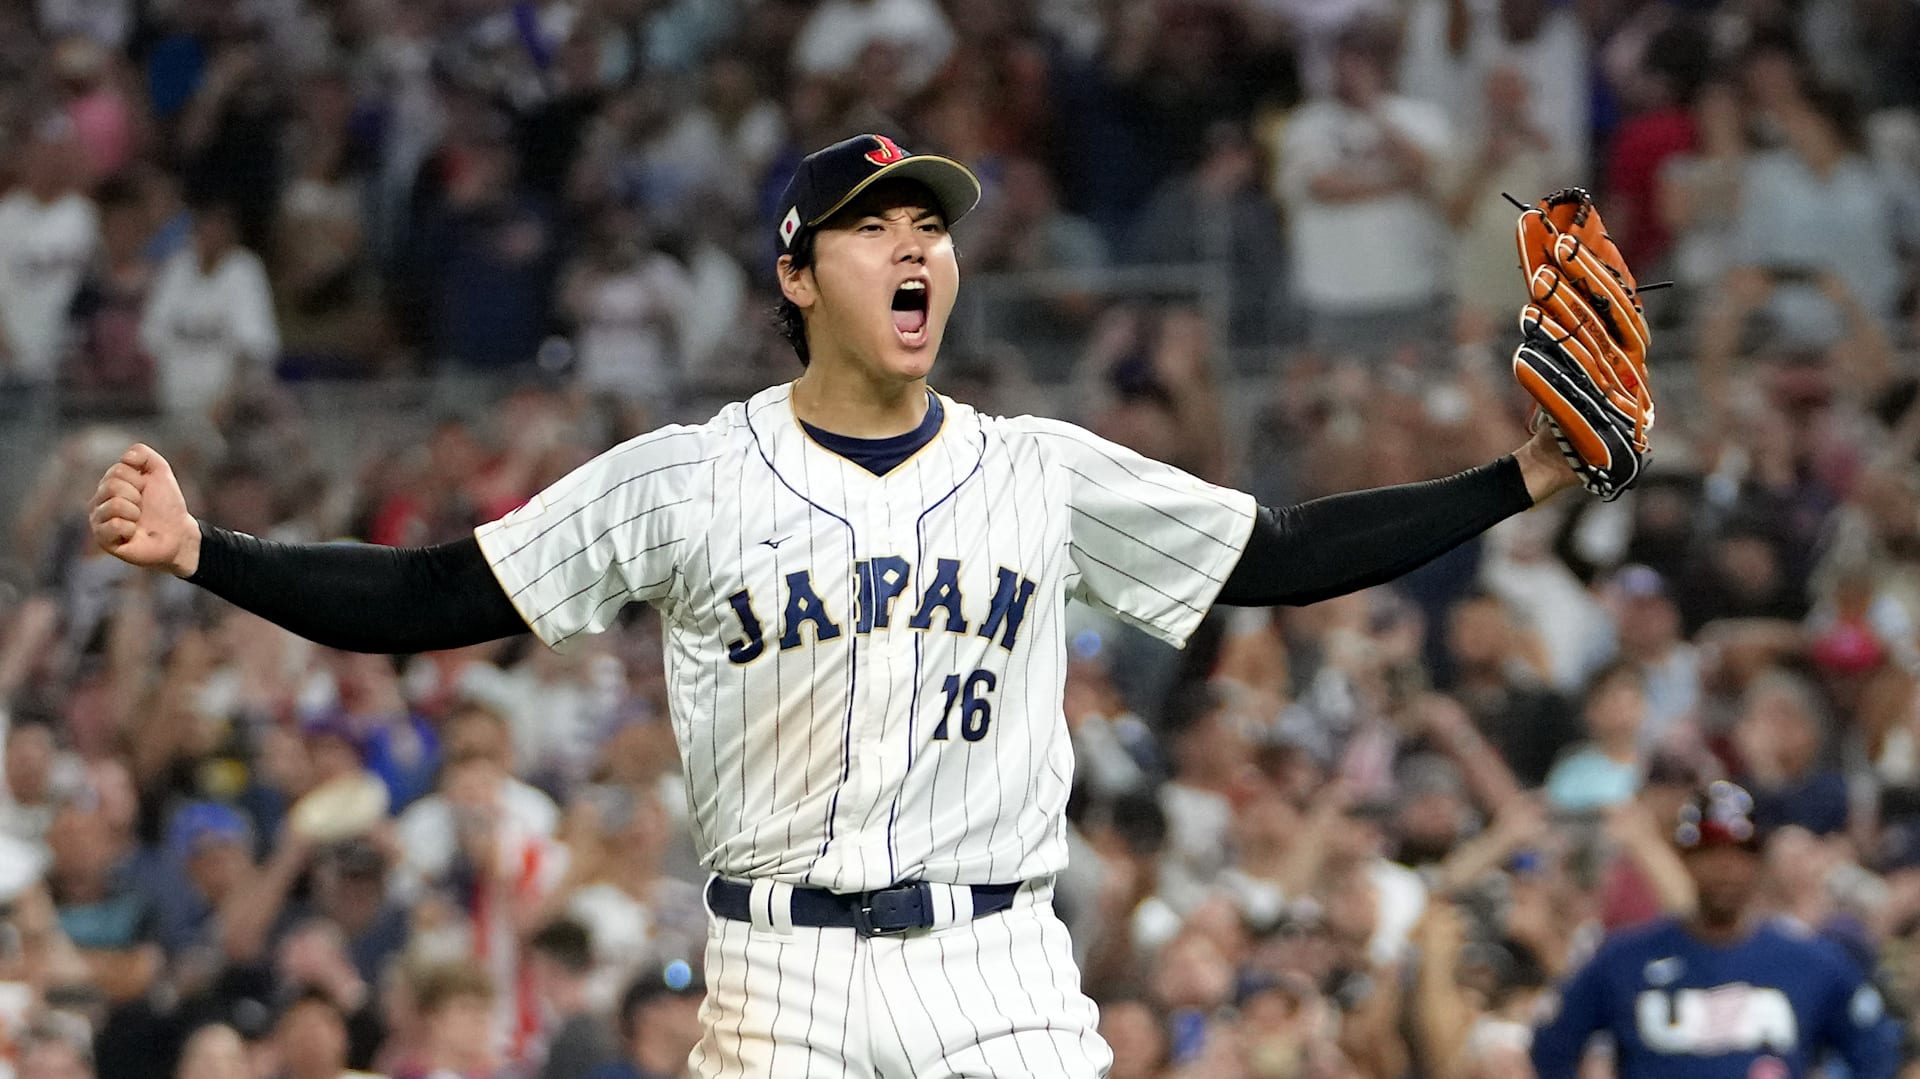 Japanese star Shohei Ohtani to face Australia 's best in 'once-in